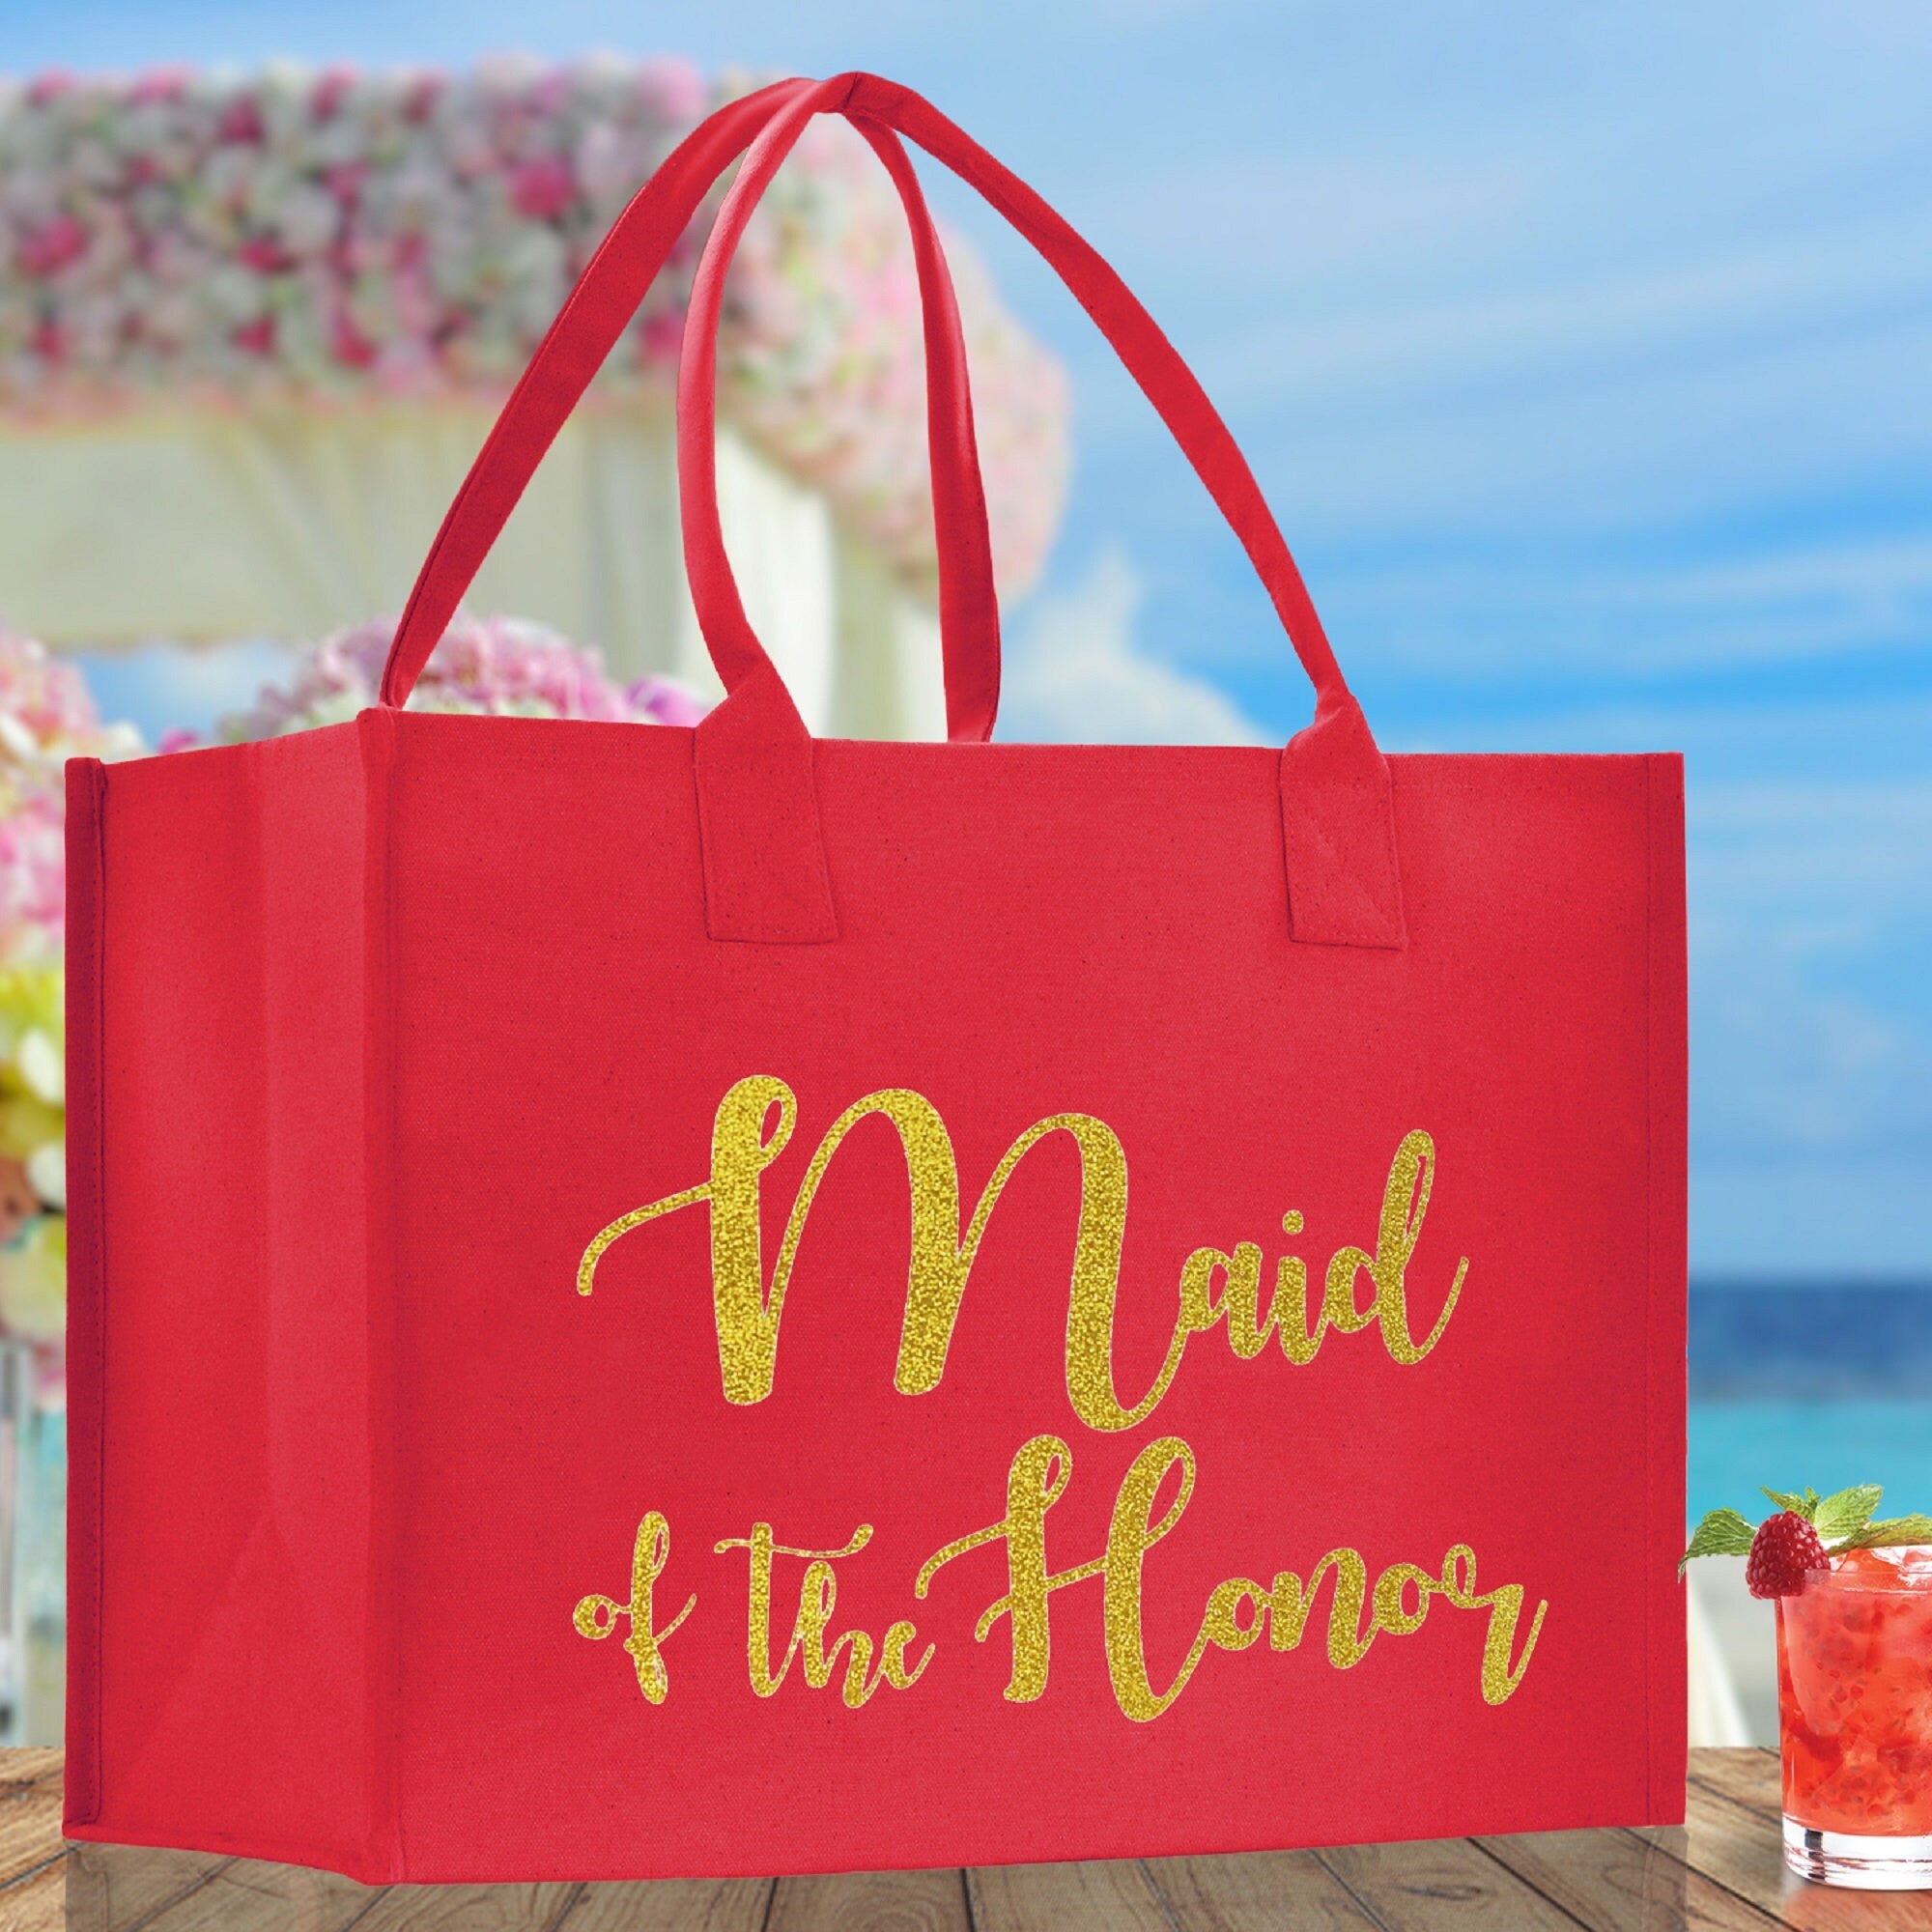 Maid of The Honor Large Print Tote Bag 100% Cotton Canvas Bridal Party Tote Bachelorette Bag Bridal Chic Tote Bags Wedding Totes